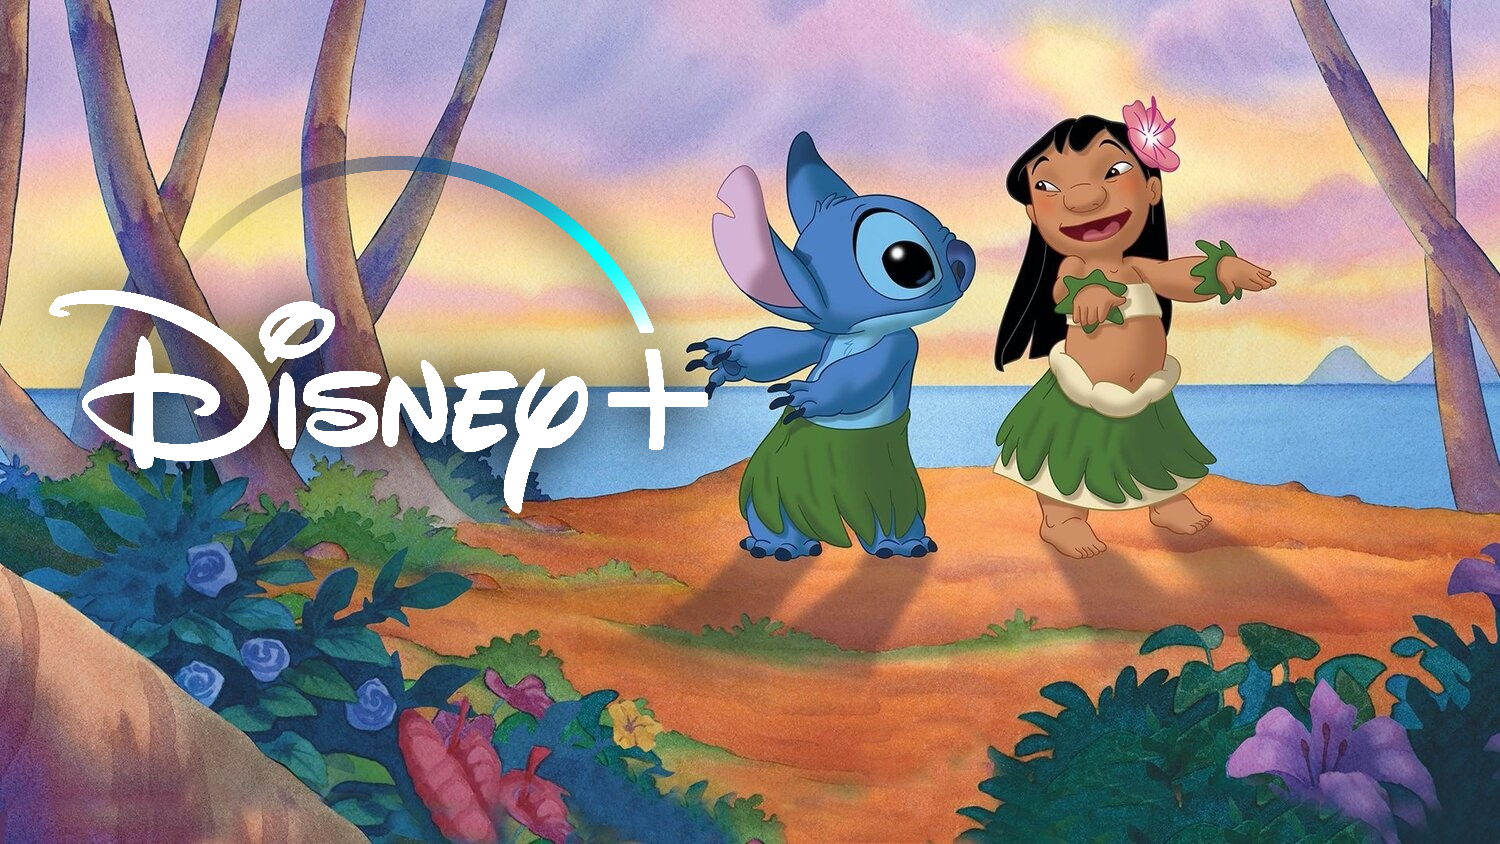 Live-Action ‘Lilo & Stitch’ to Begin Filming February 2023